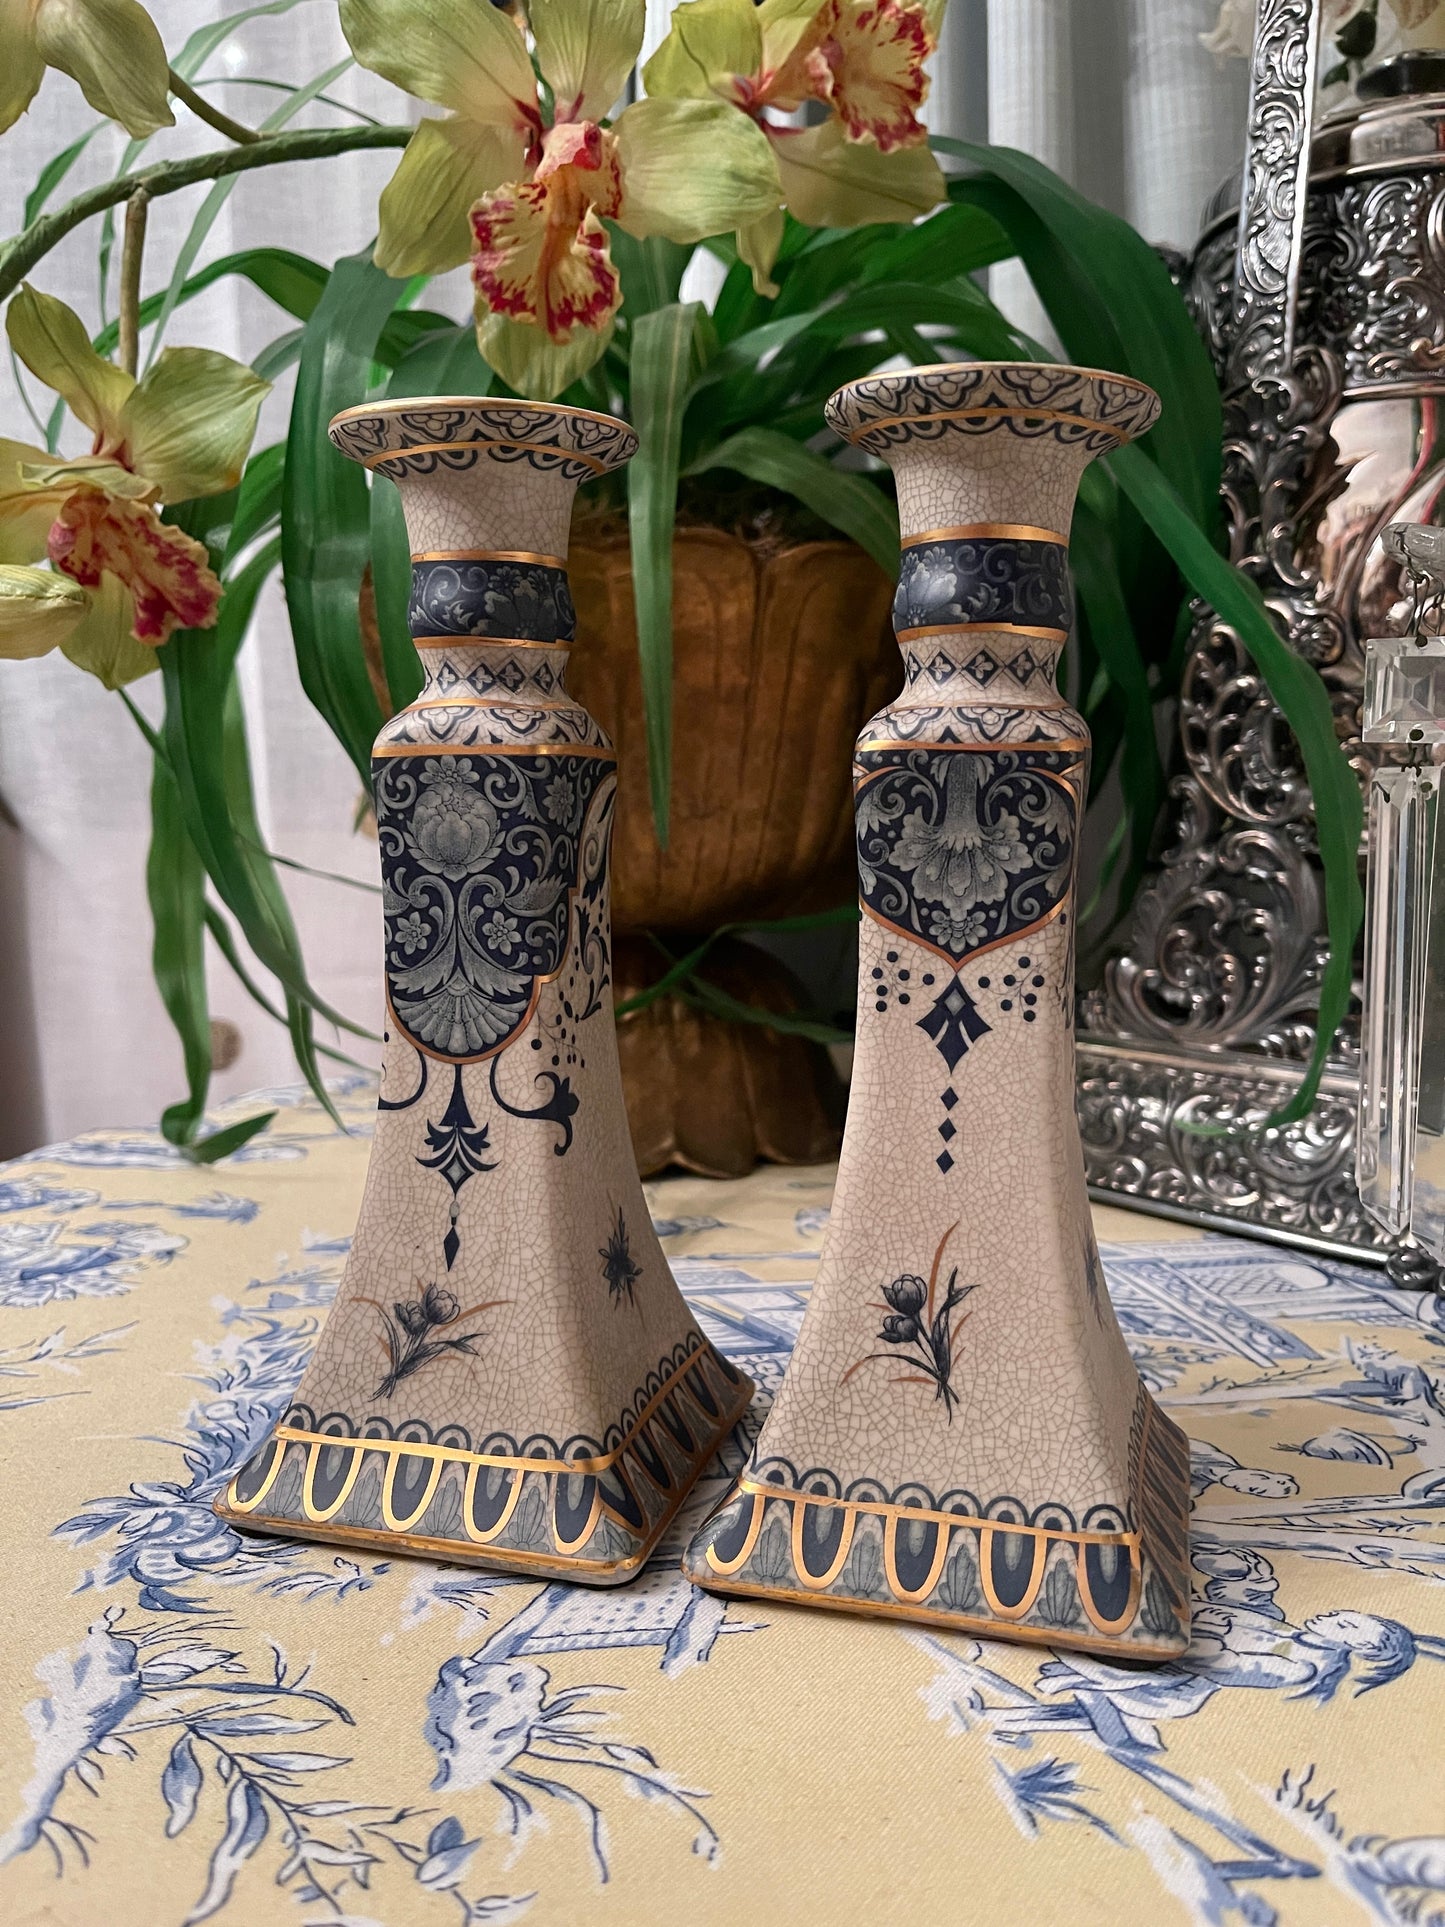 Vintage candlesticks with varying shades of blue and gold on an intentionally crazed finish, Beautifully detailed